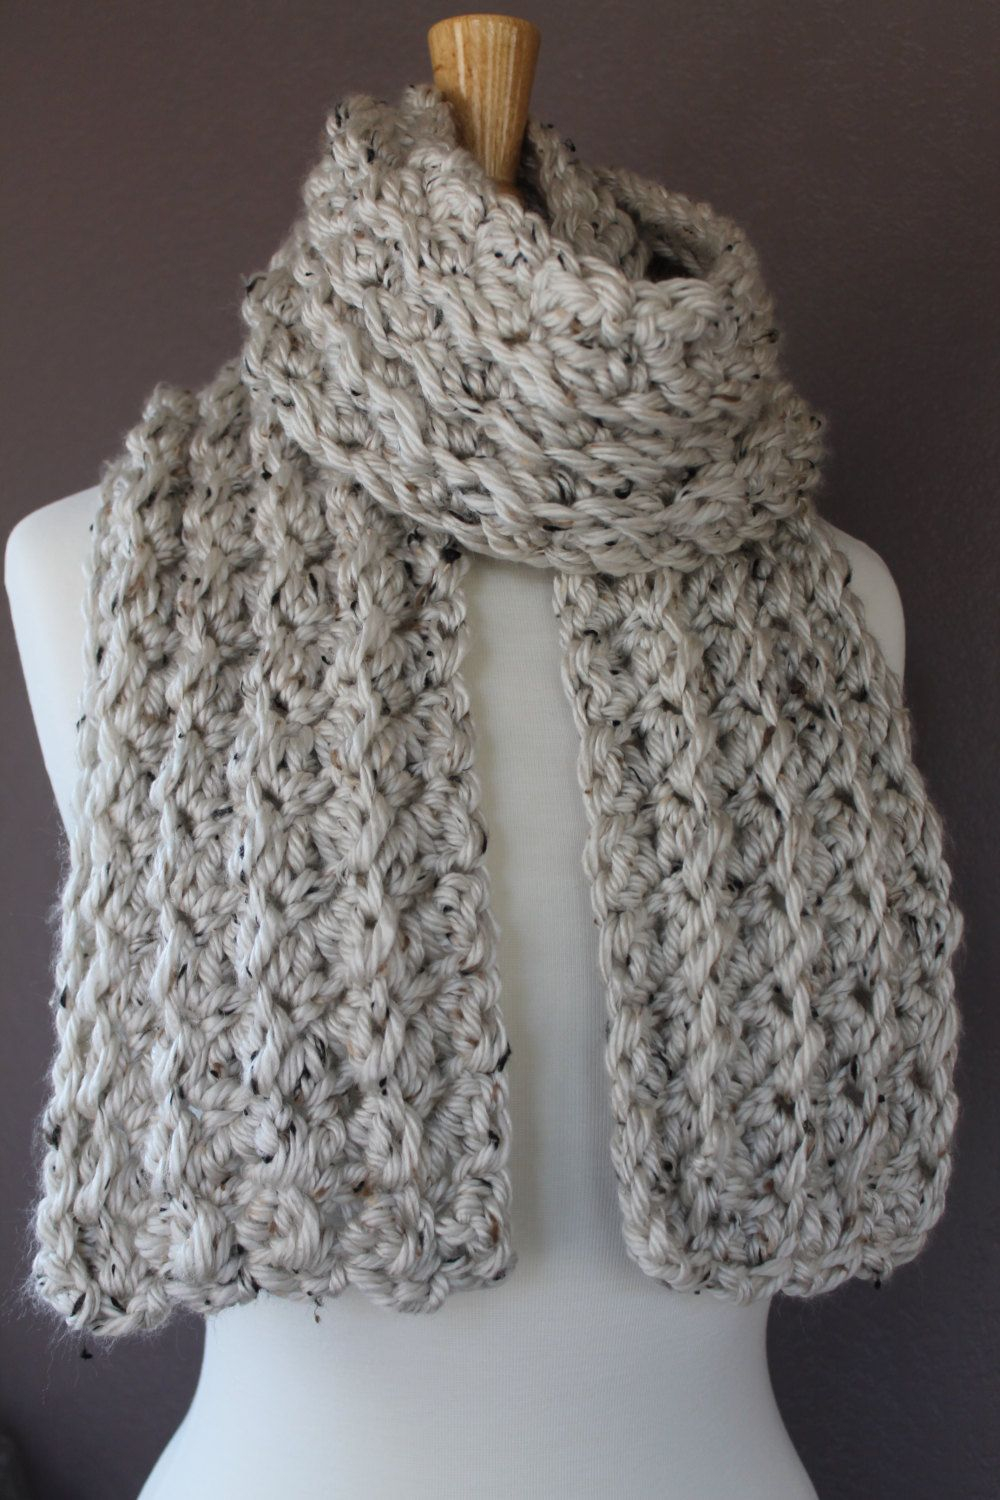 Simple Crochet Scarf Patterns Come And Check Out This Very Easy Crochet Scarf Pattern From Crafty